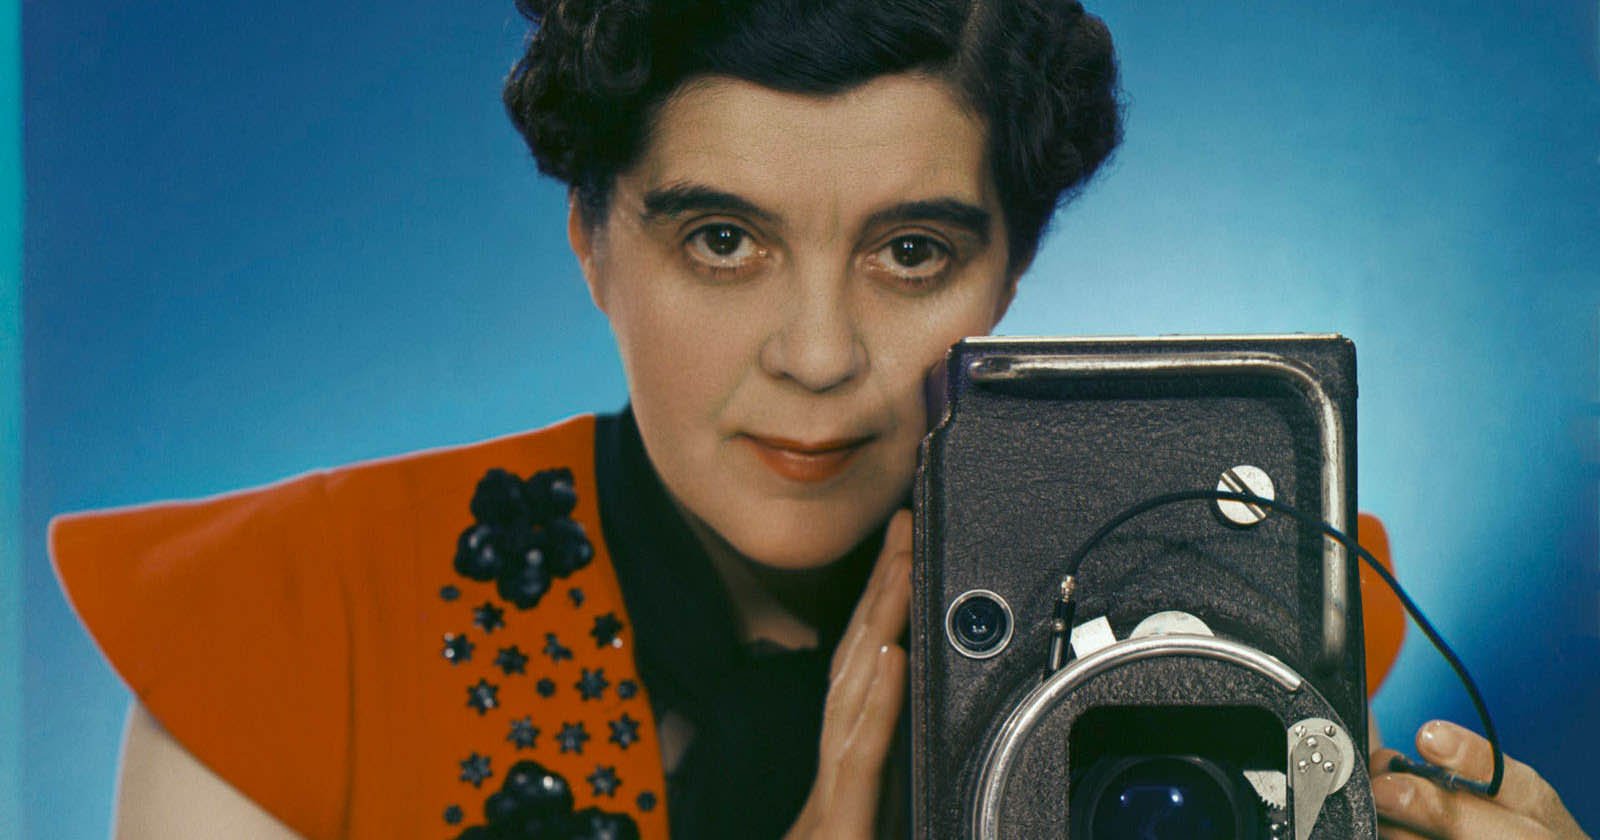 Yevonde: An Introduction to the Woman Who Pioneered Colour Photography